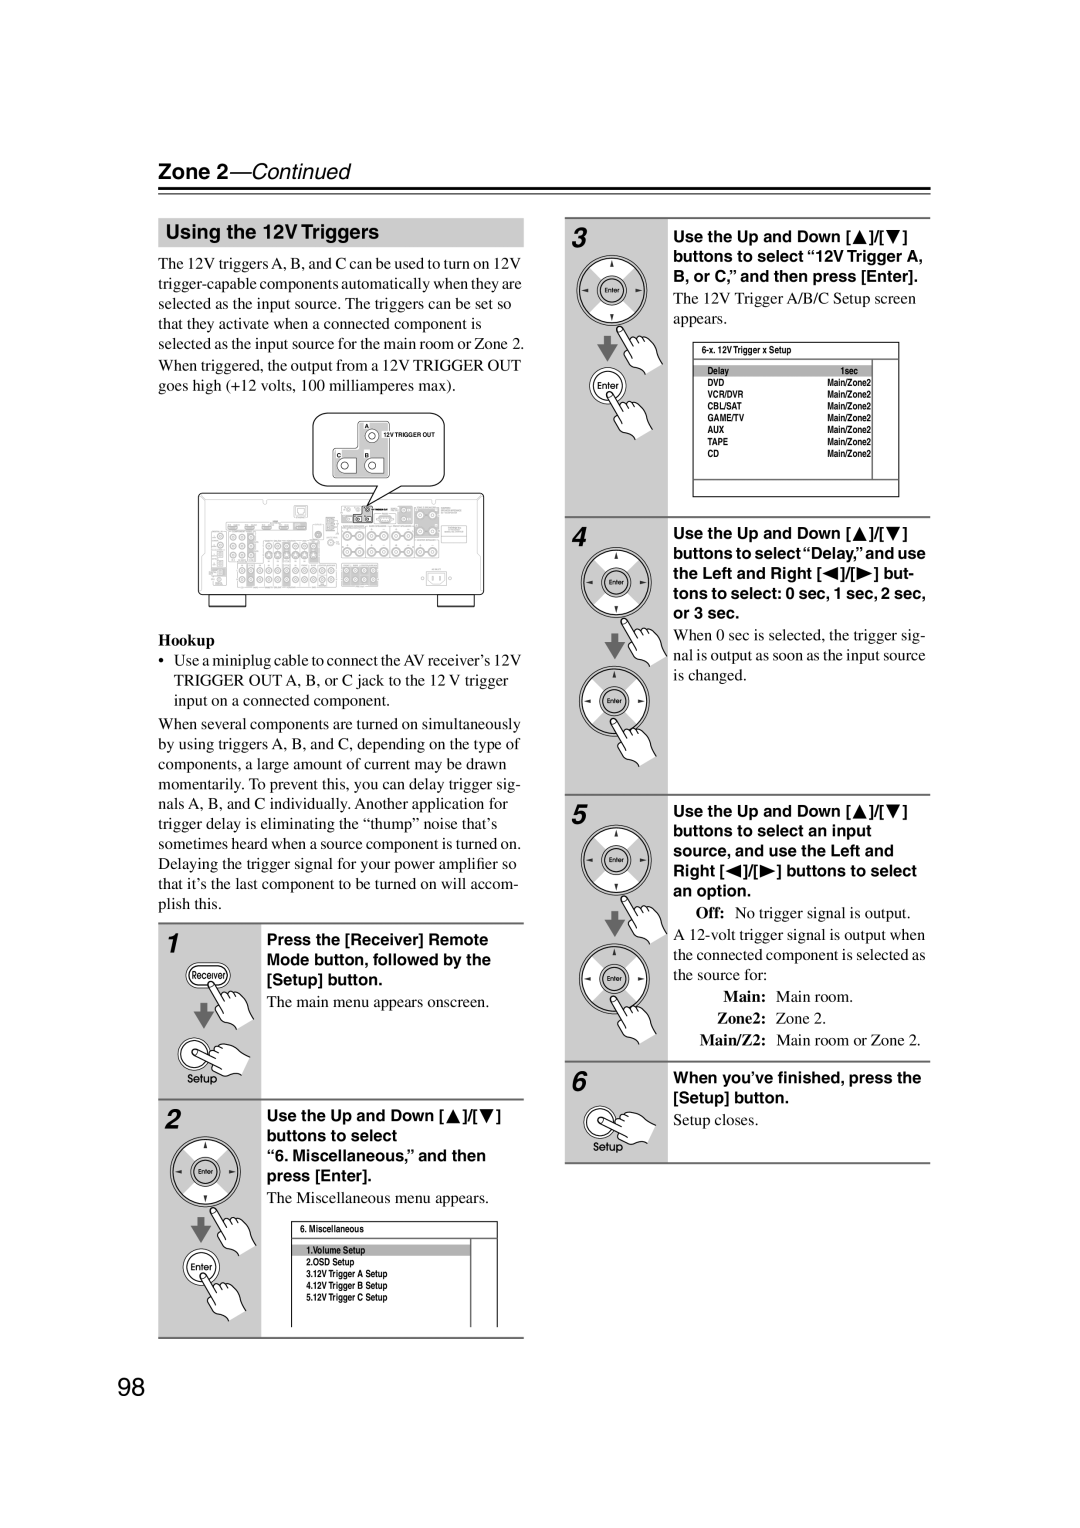 Integra DTR-5.9 instruction manual Using the 12V Triggers, Zone 2—Continued, Hookup 